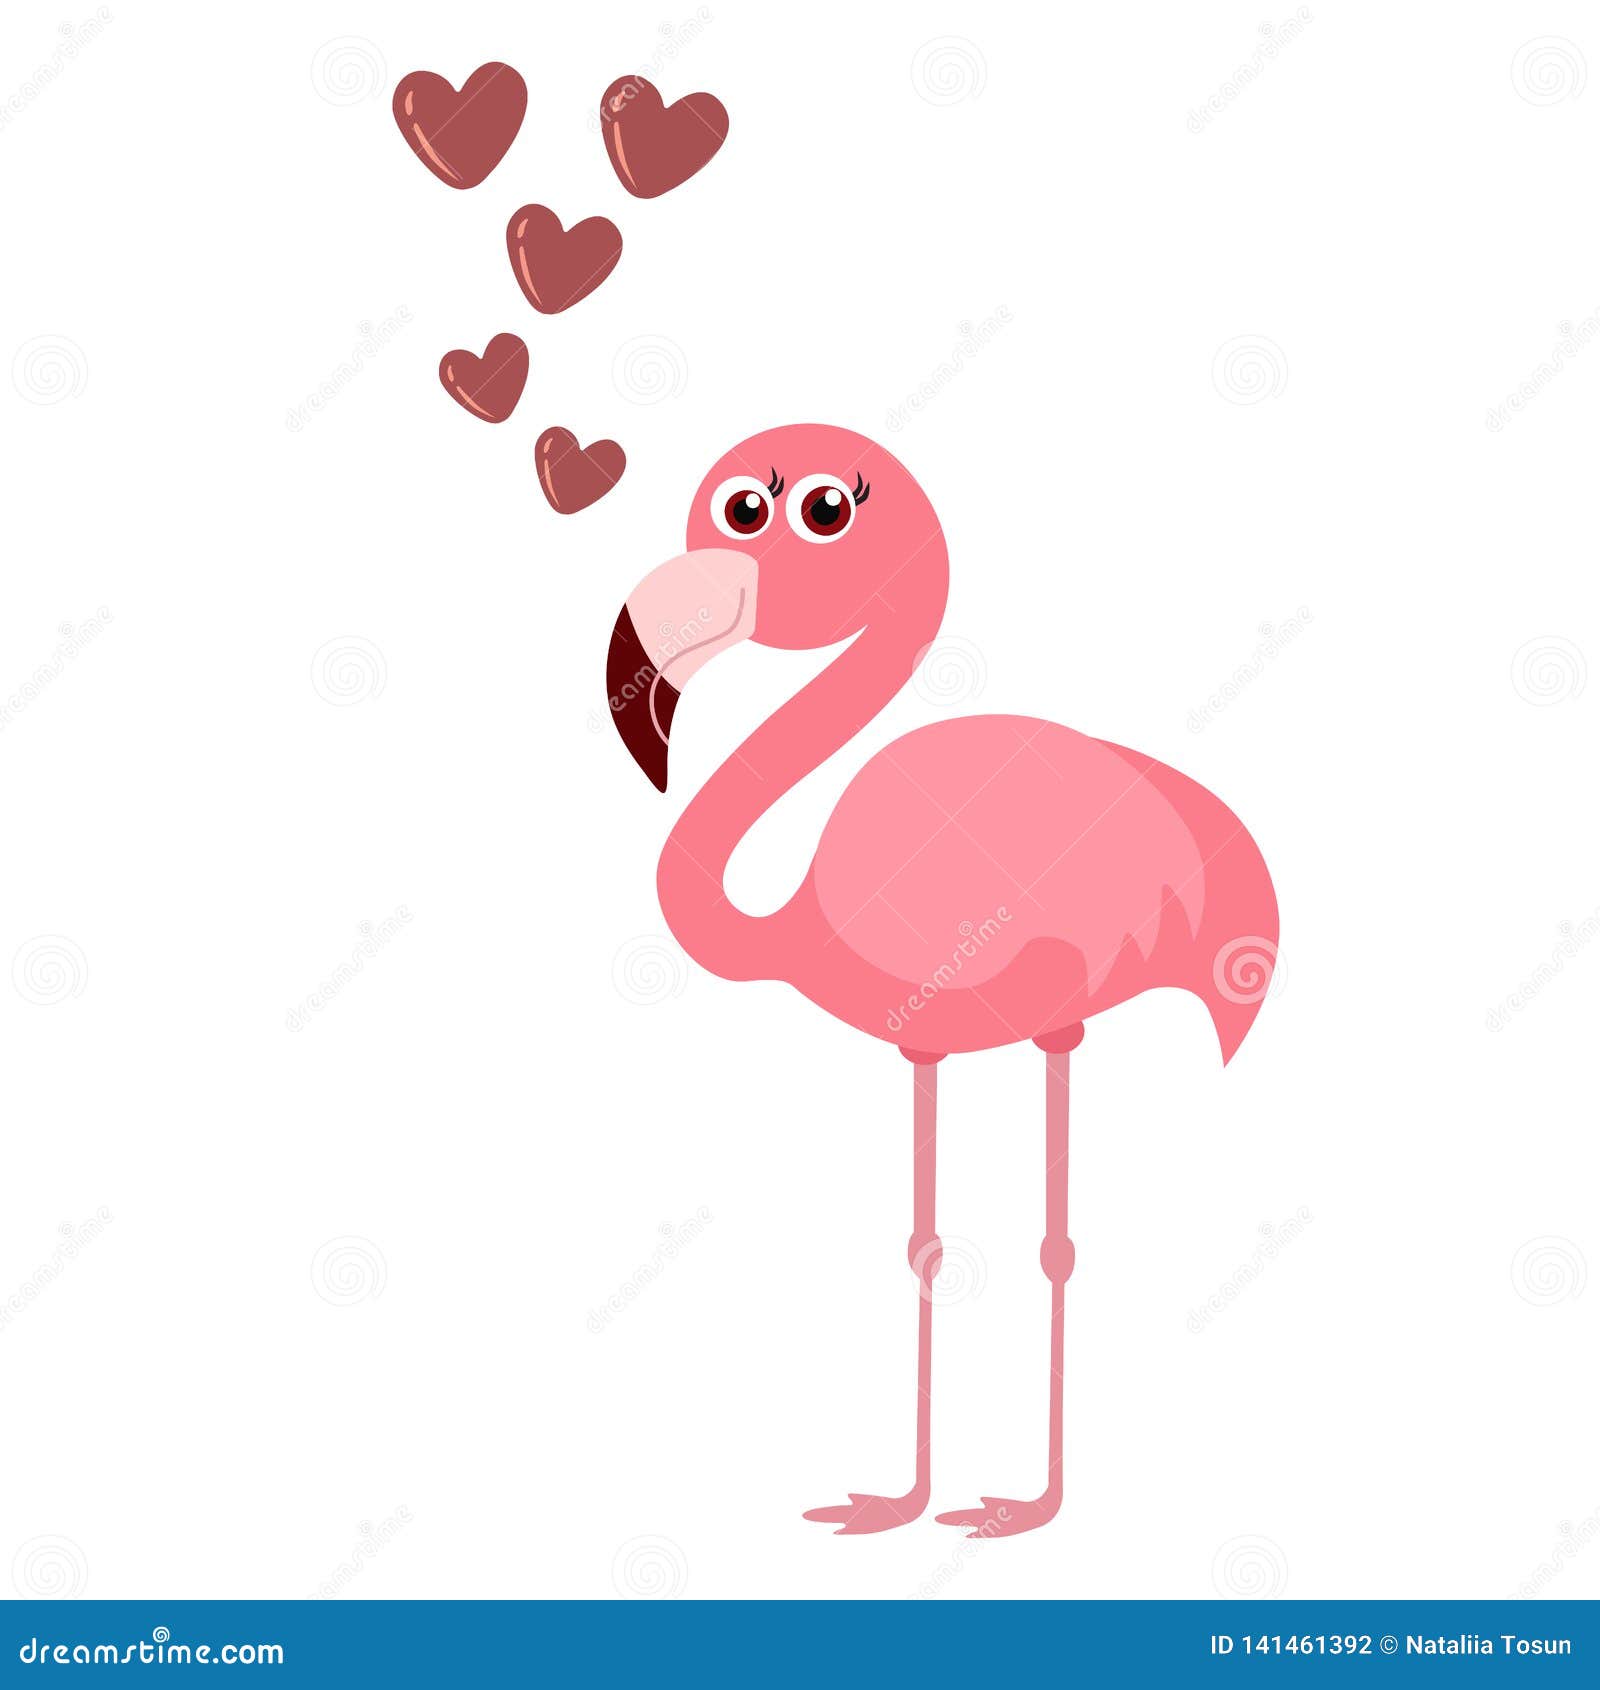 Print cute flamingo with hearts, vector illustration